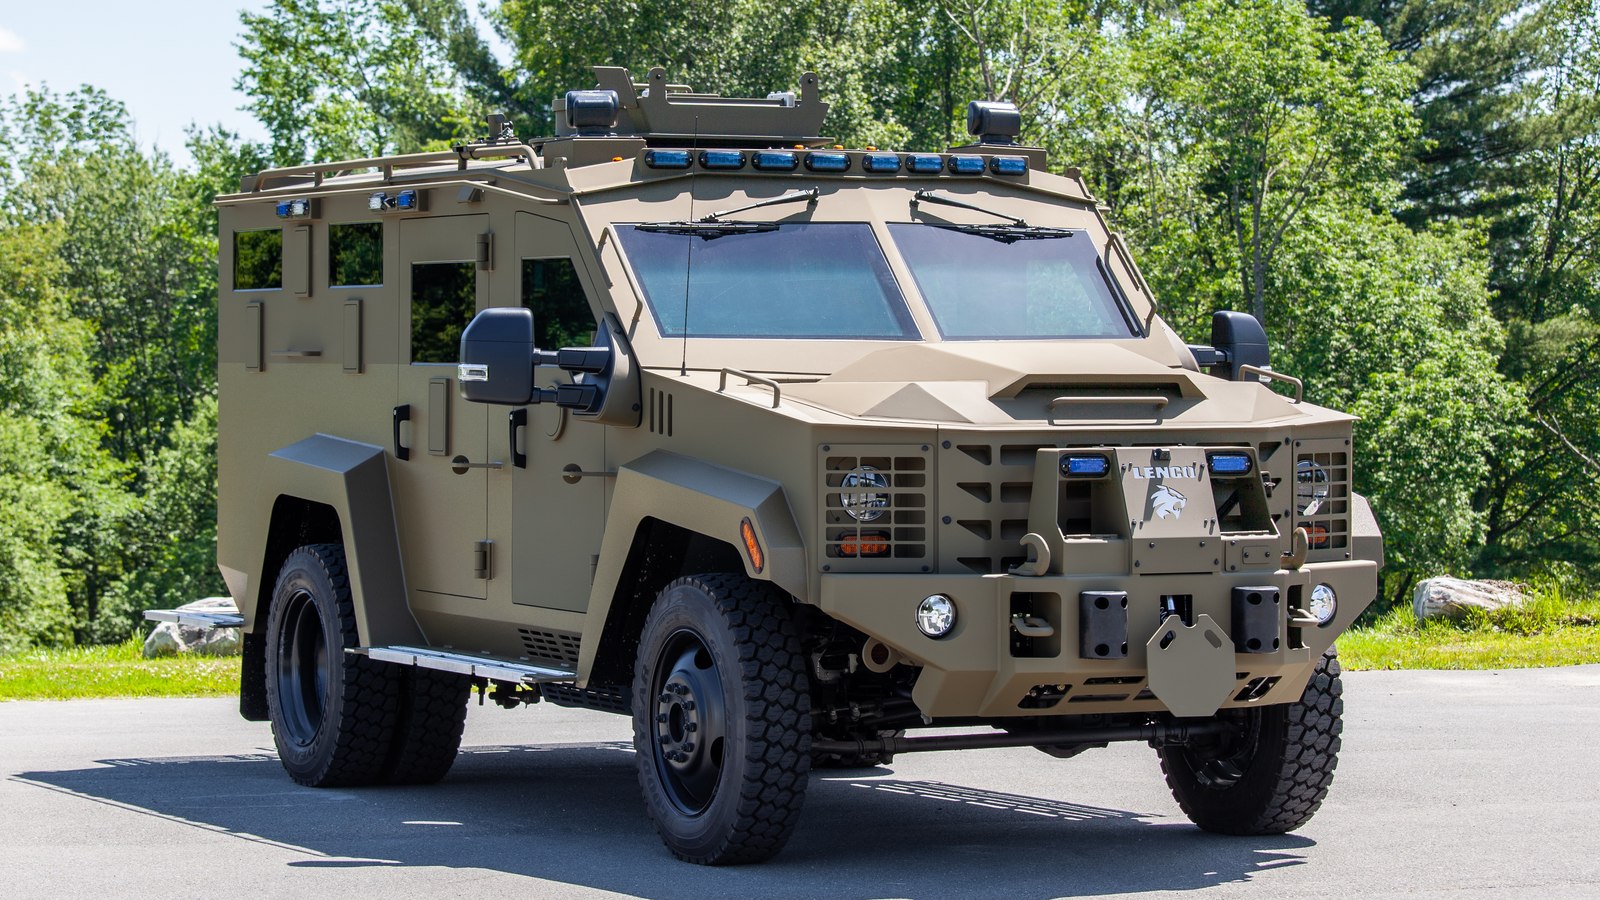 Omaha city council OK’s new armored vehicle for police department